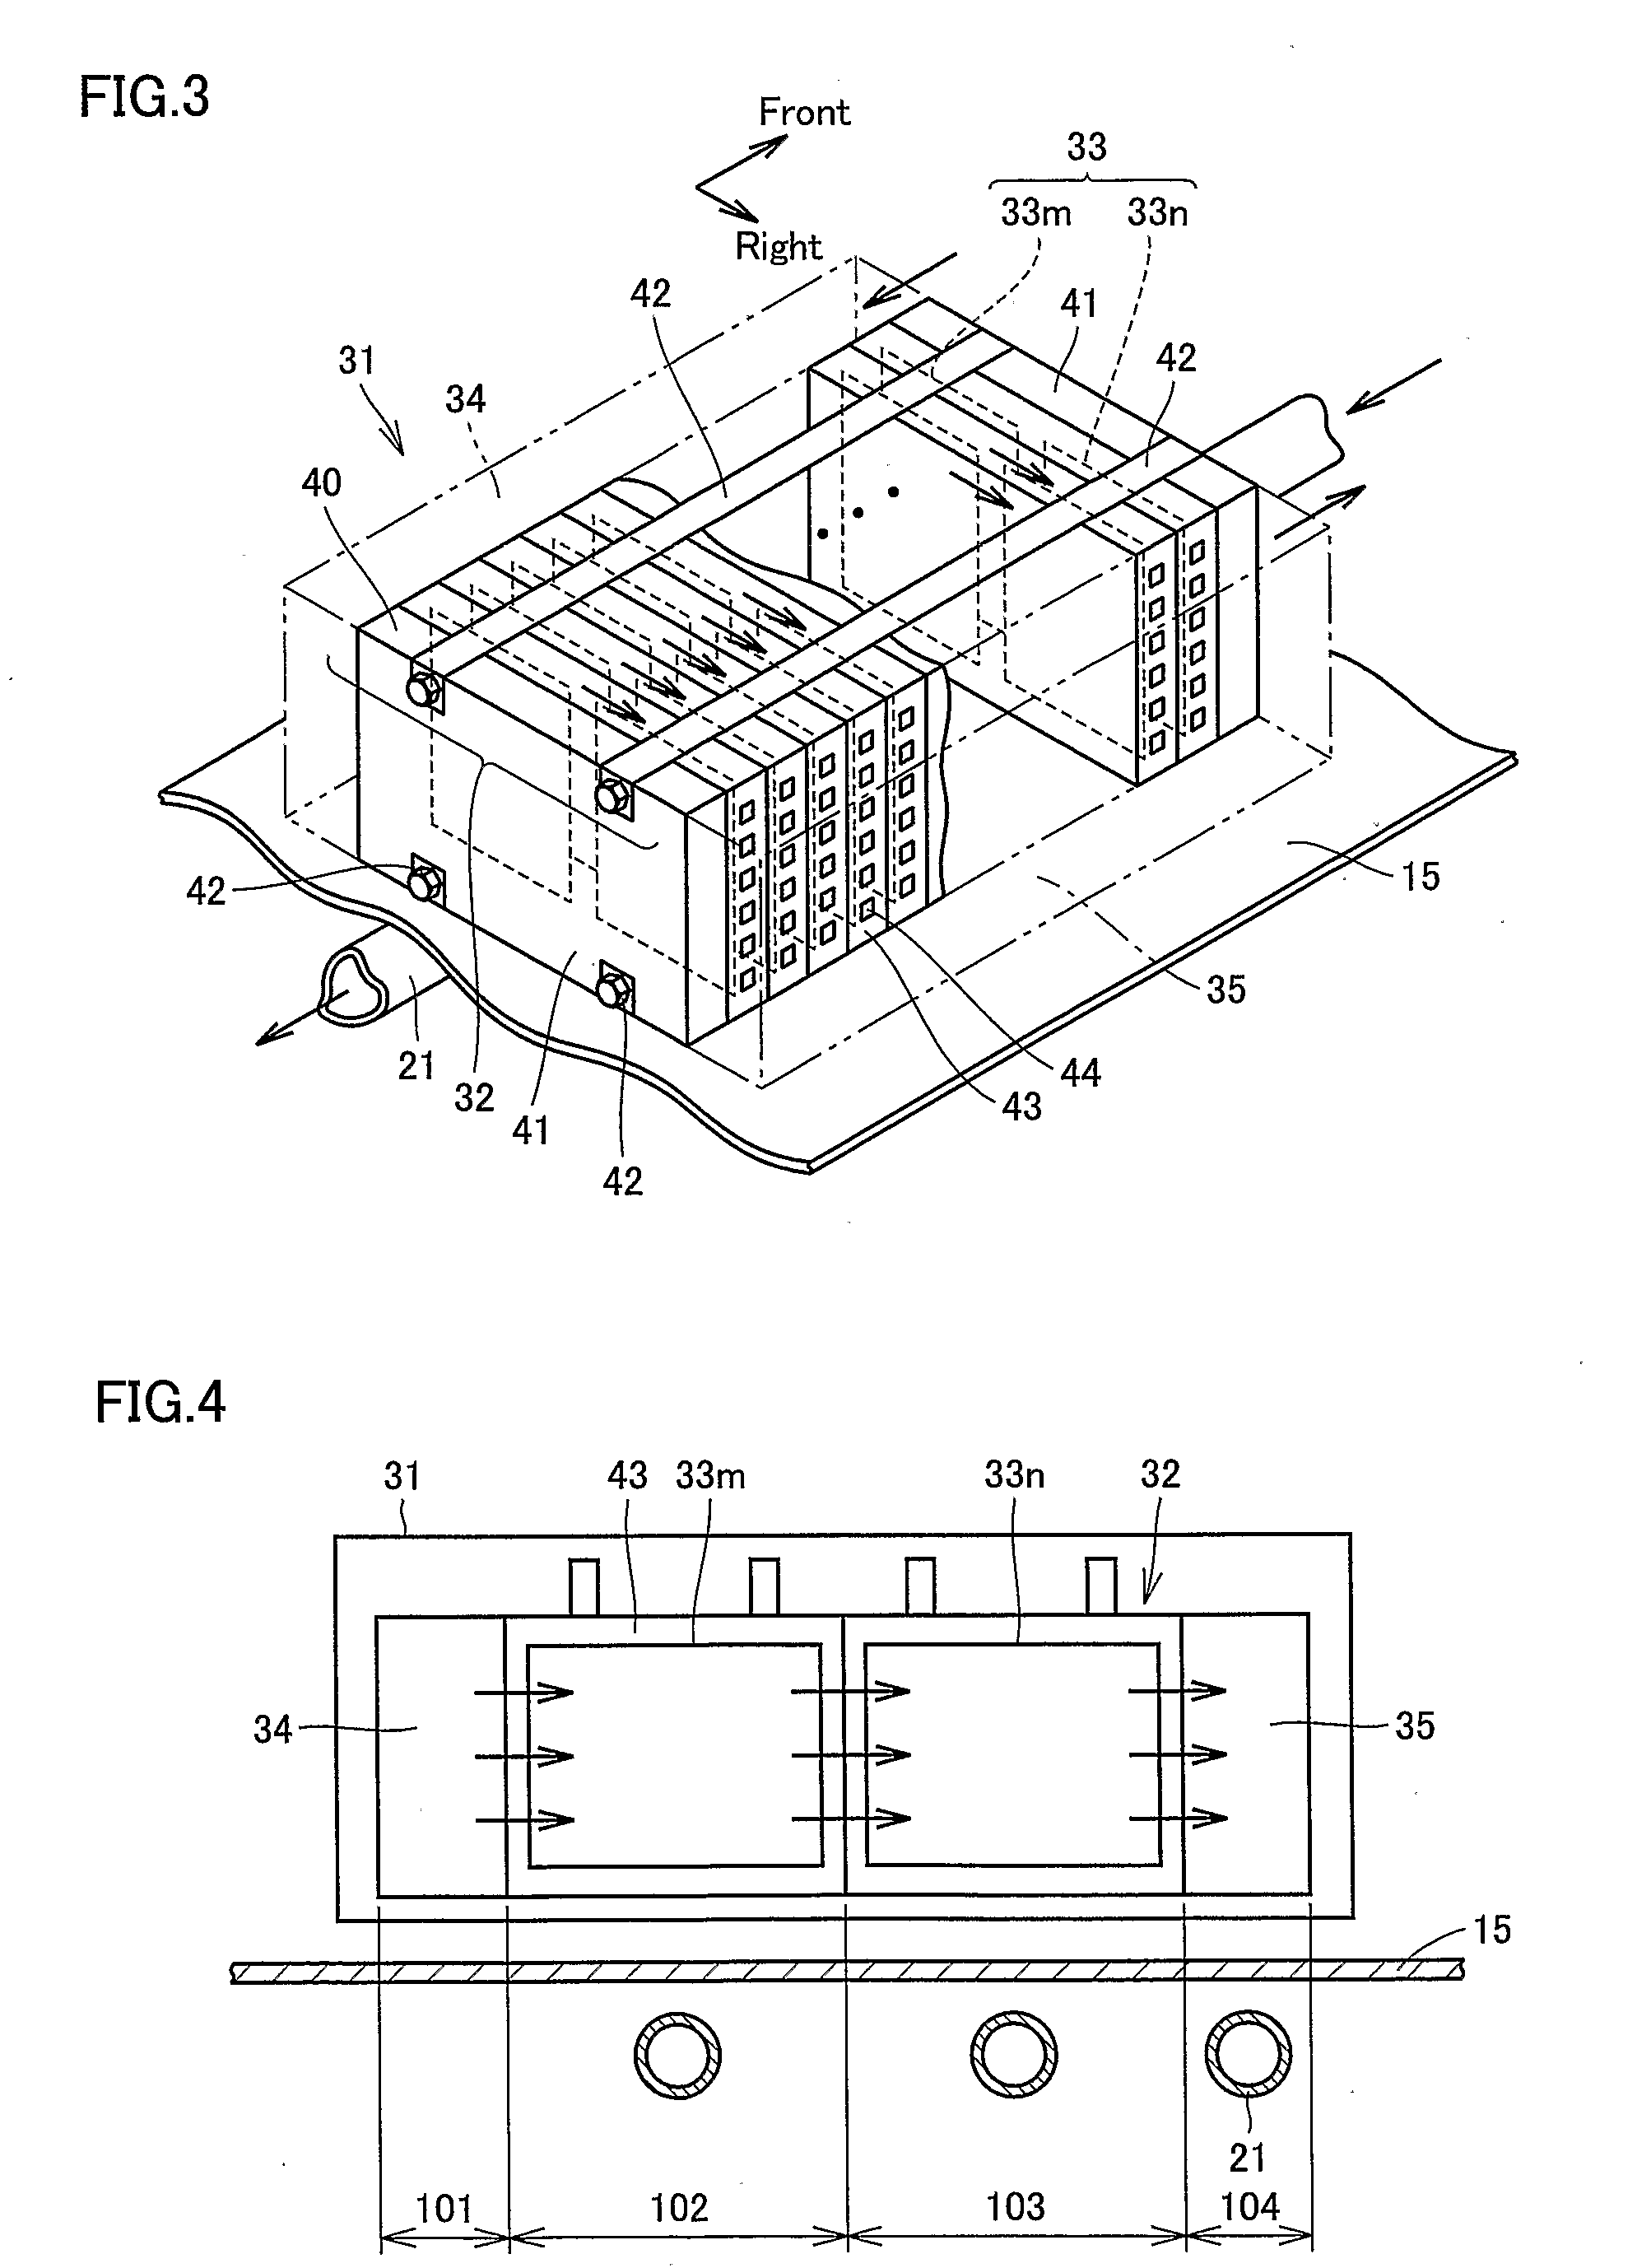 Structure of Hybrid Vehicle